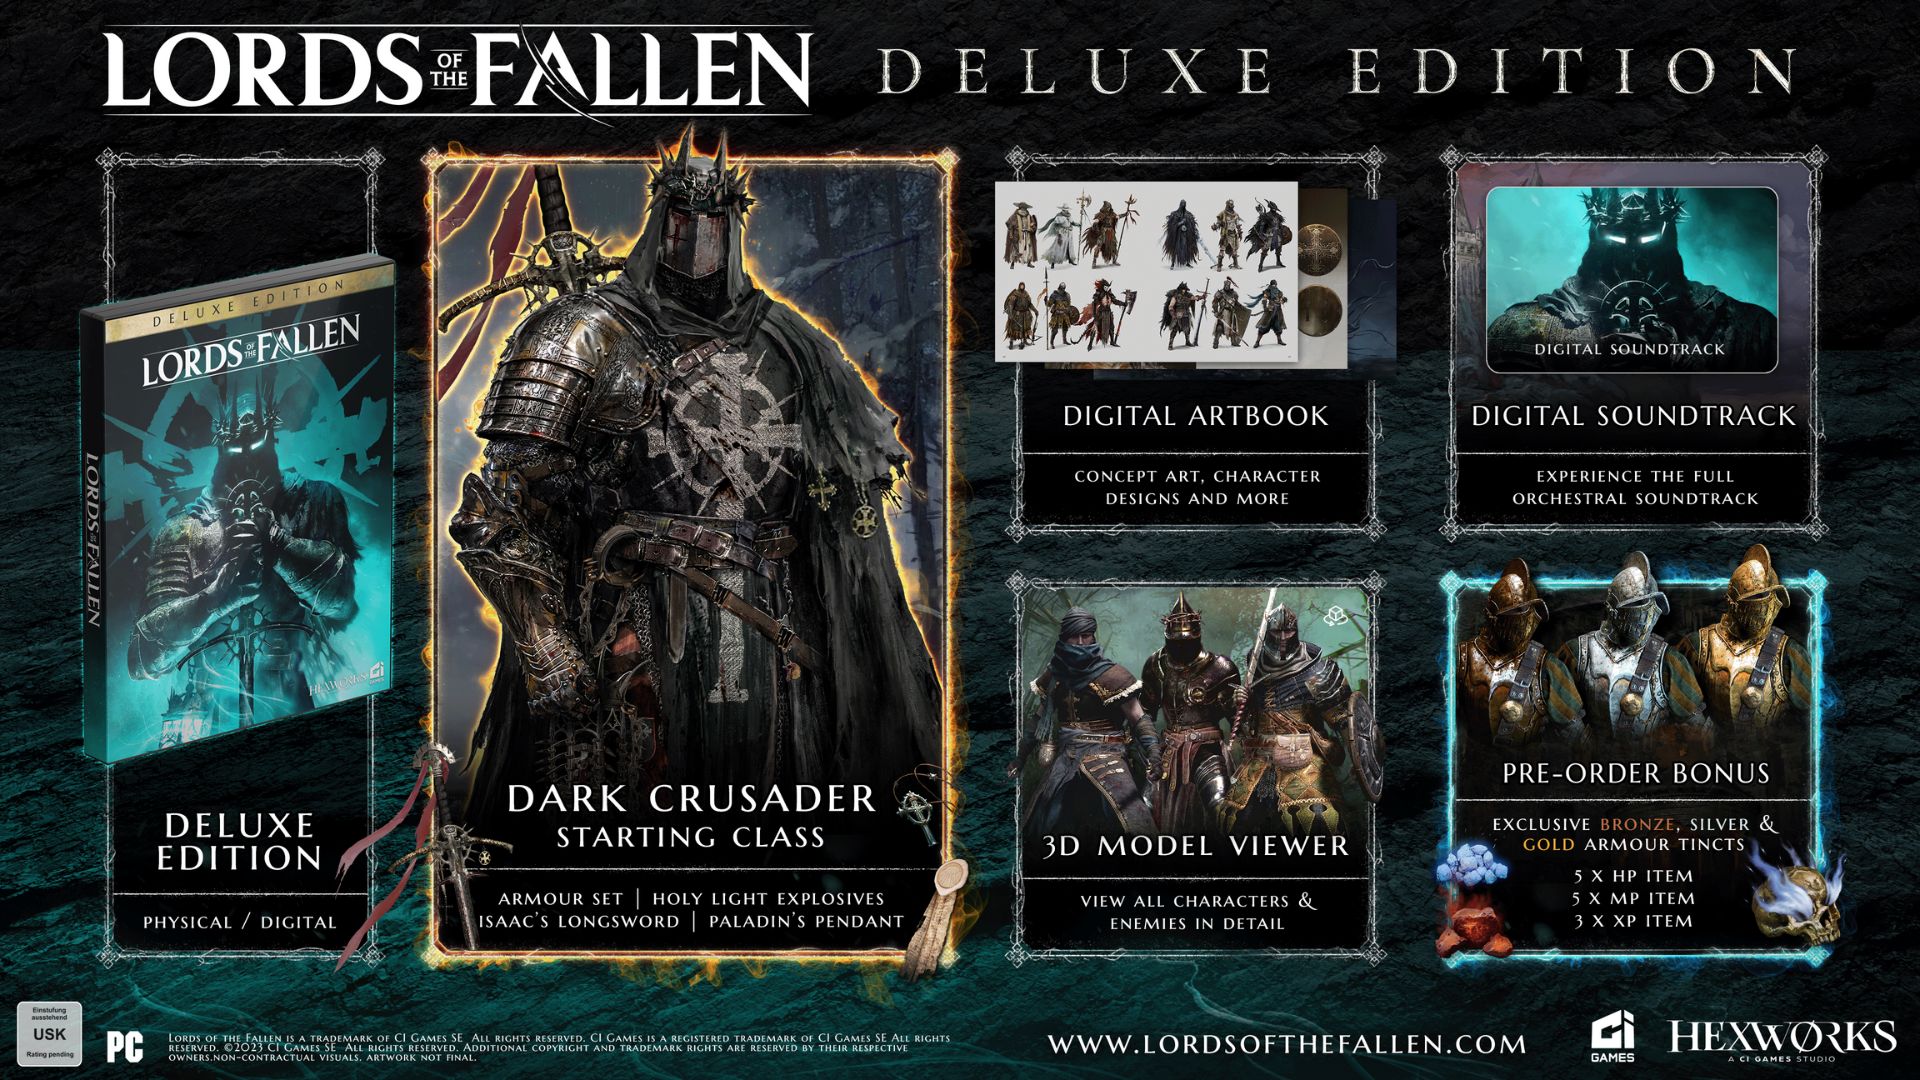 The Lords of the Fallen Release Date News, Development Updates, and More